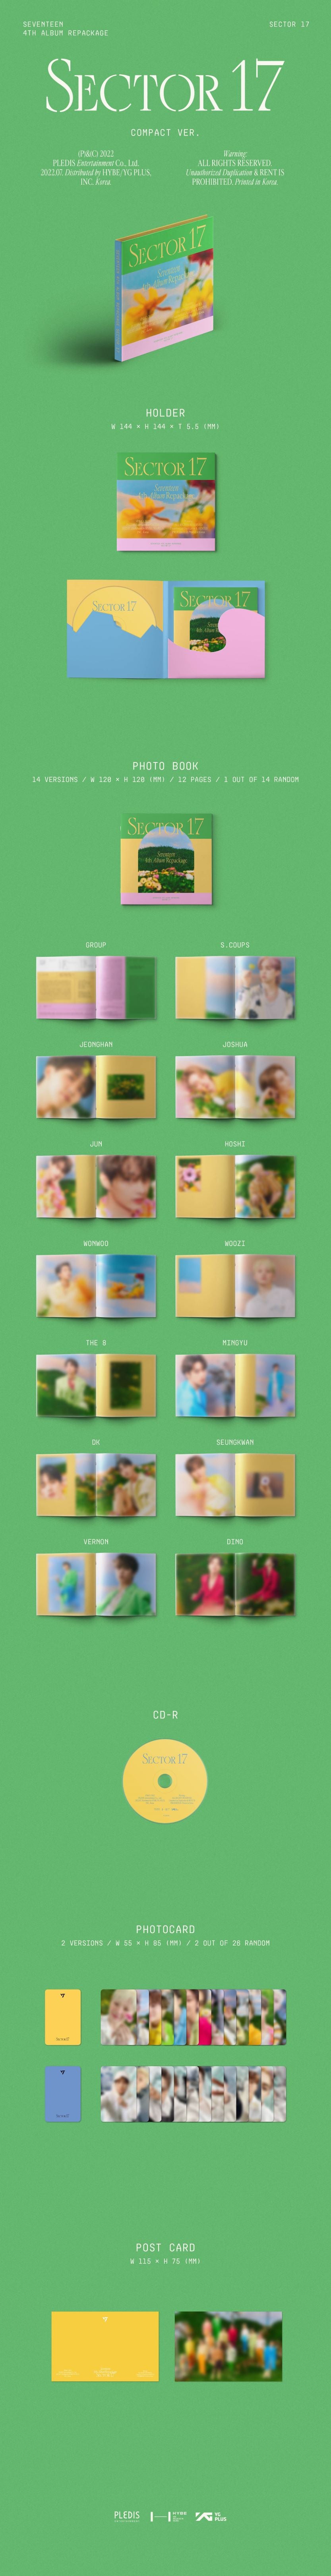 SEVENTEEN Sector 17 4th Album Repackaged COMPACT Version